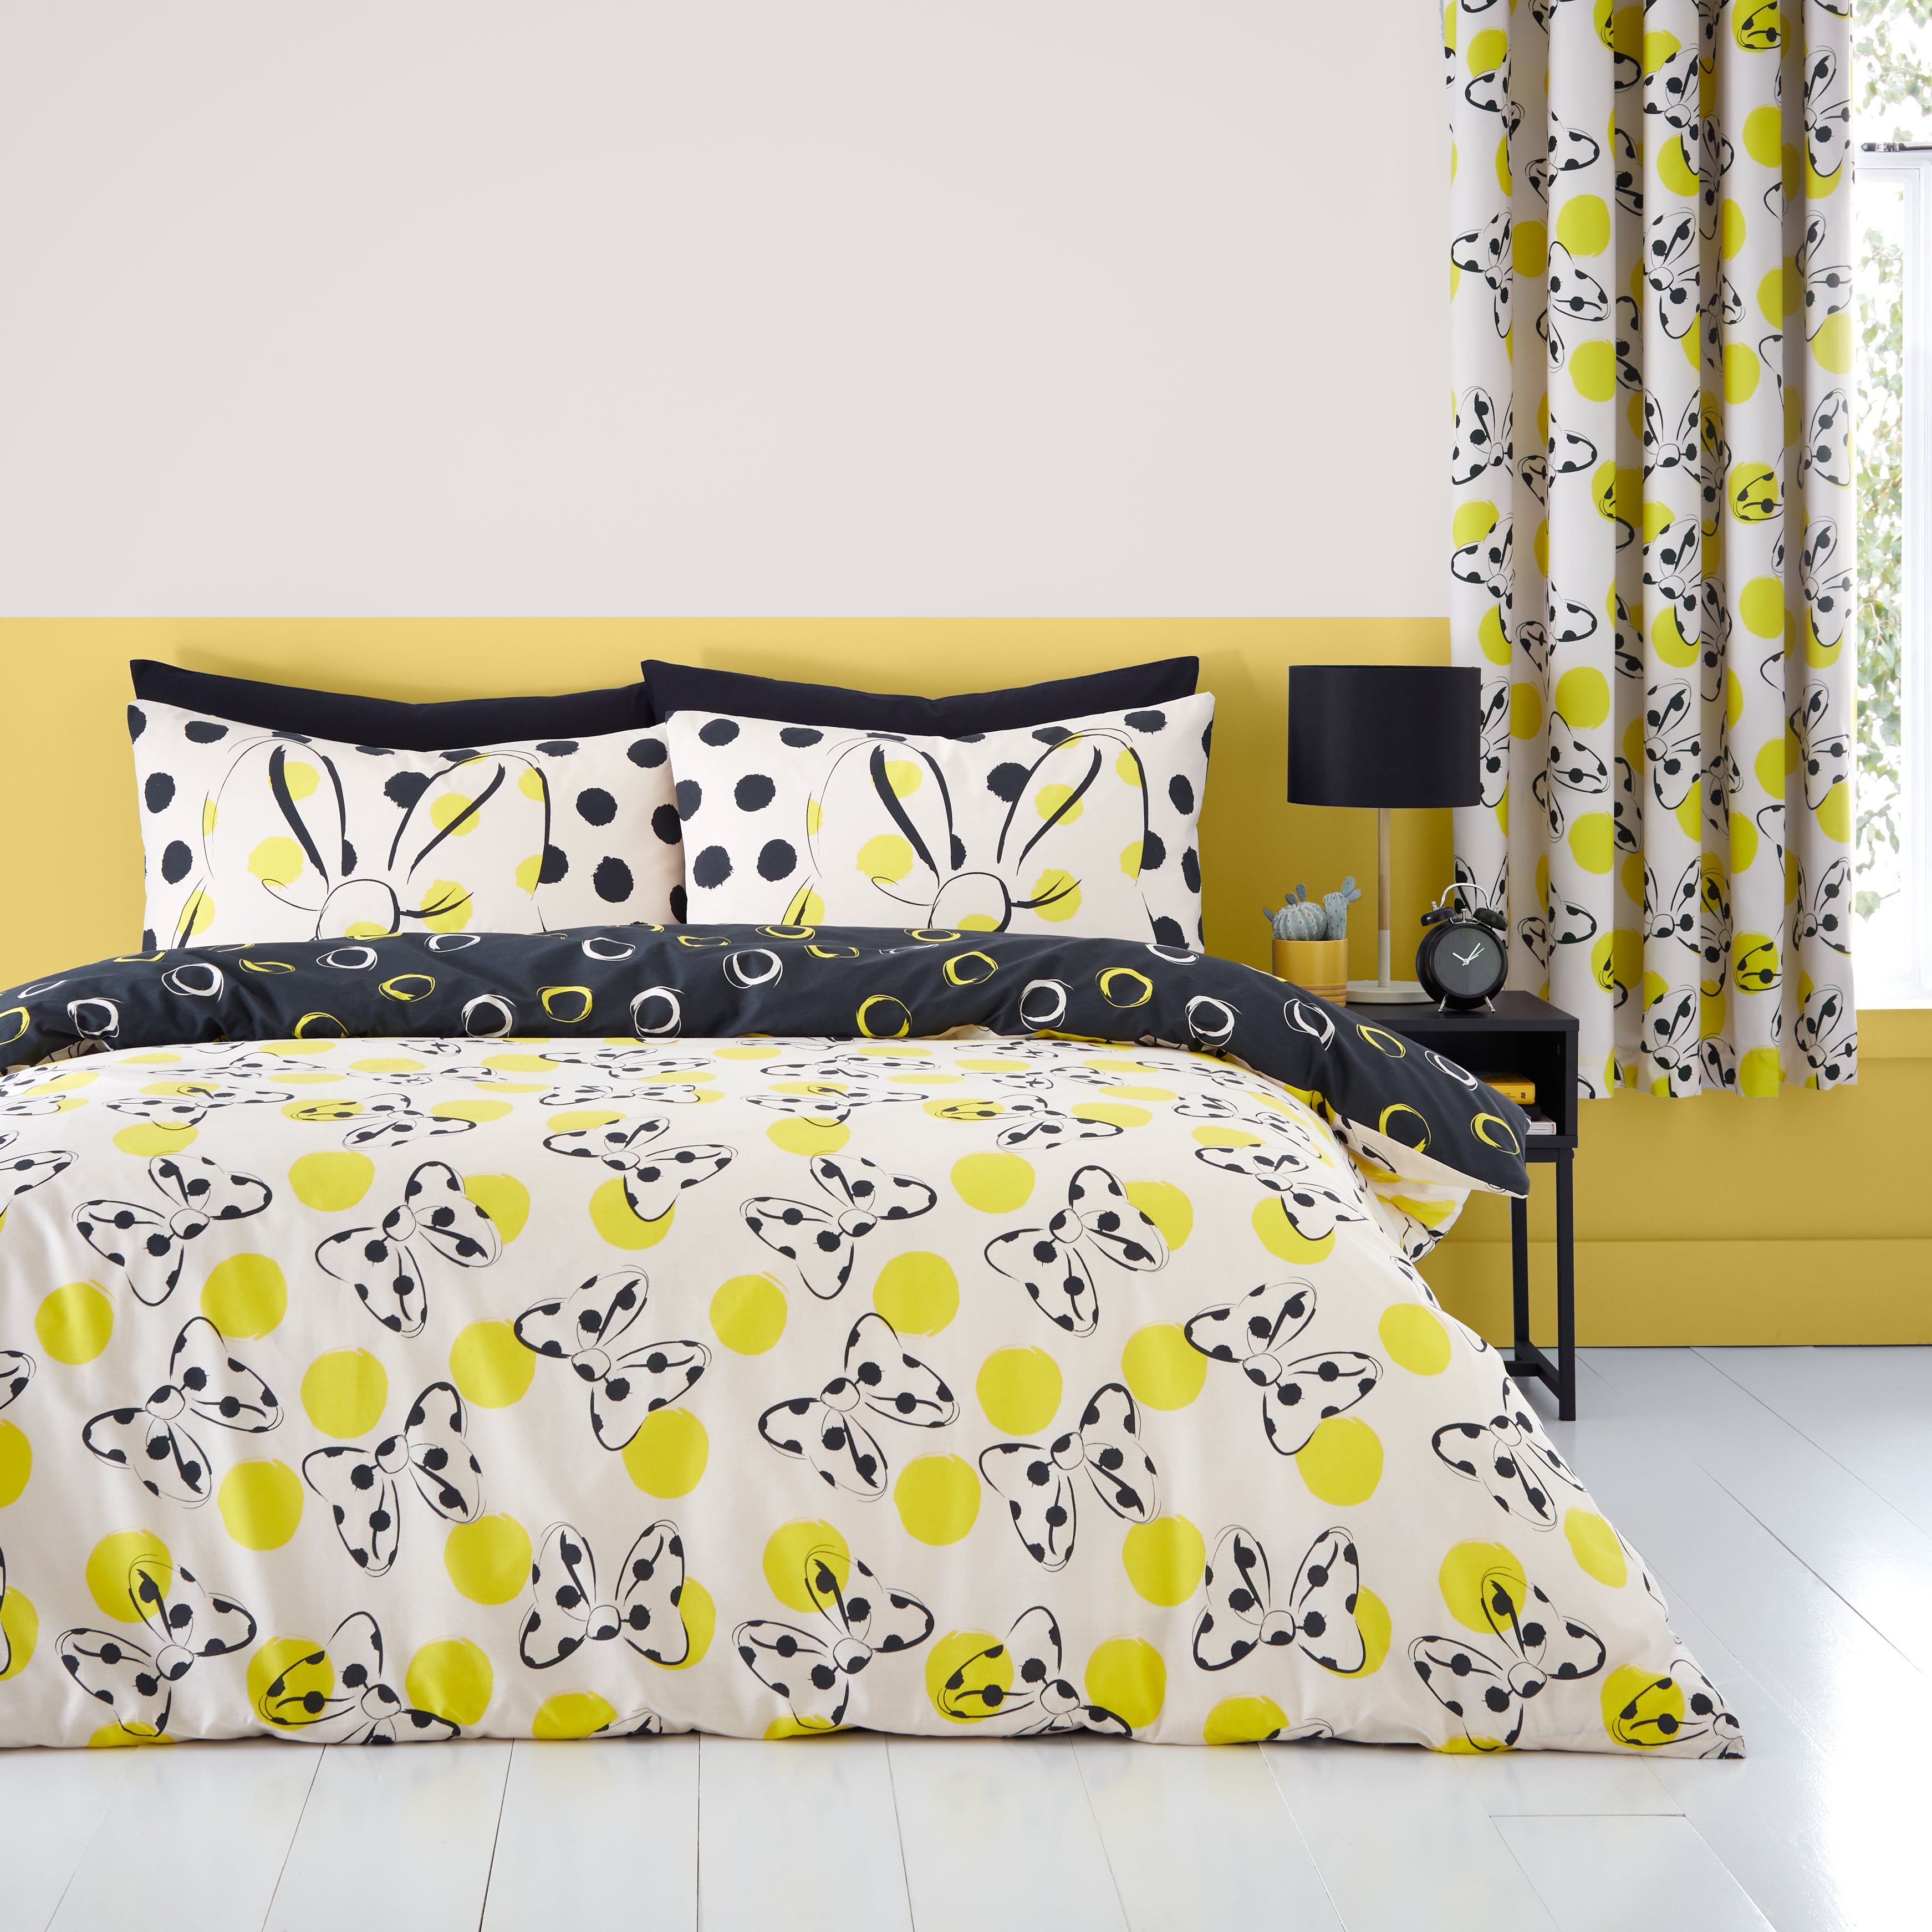 Minnie Yellow Duvet Cover and Pillowcase Set